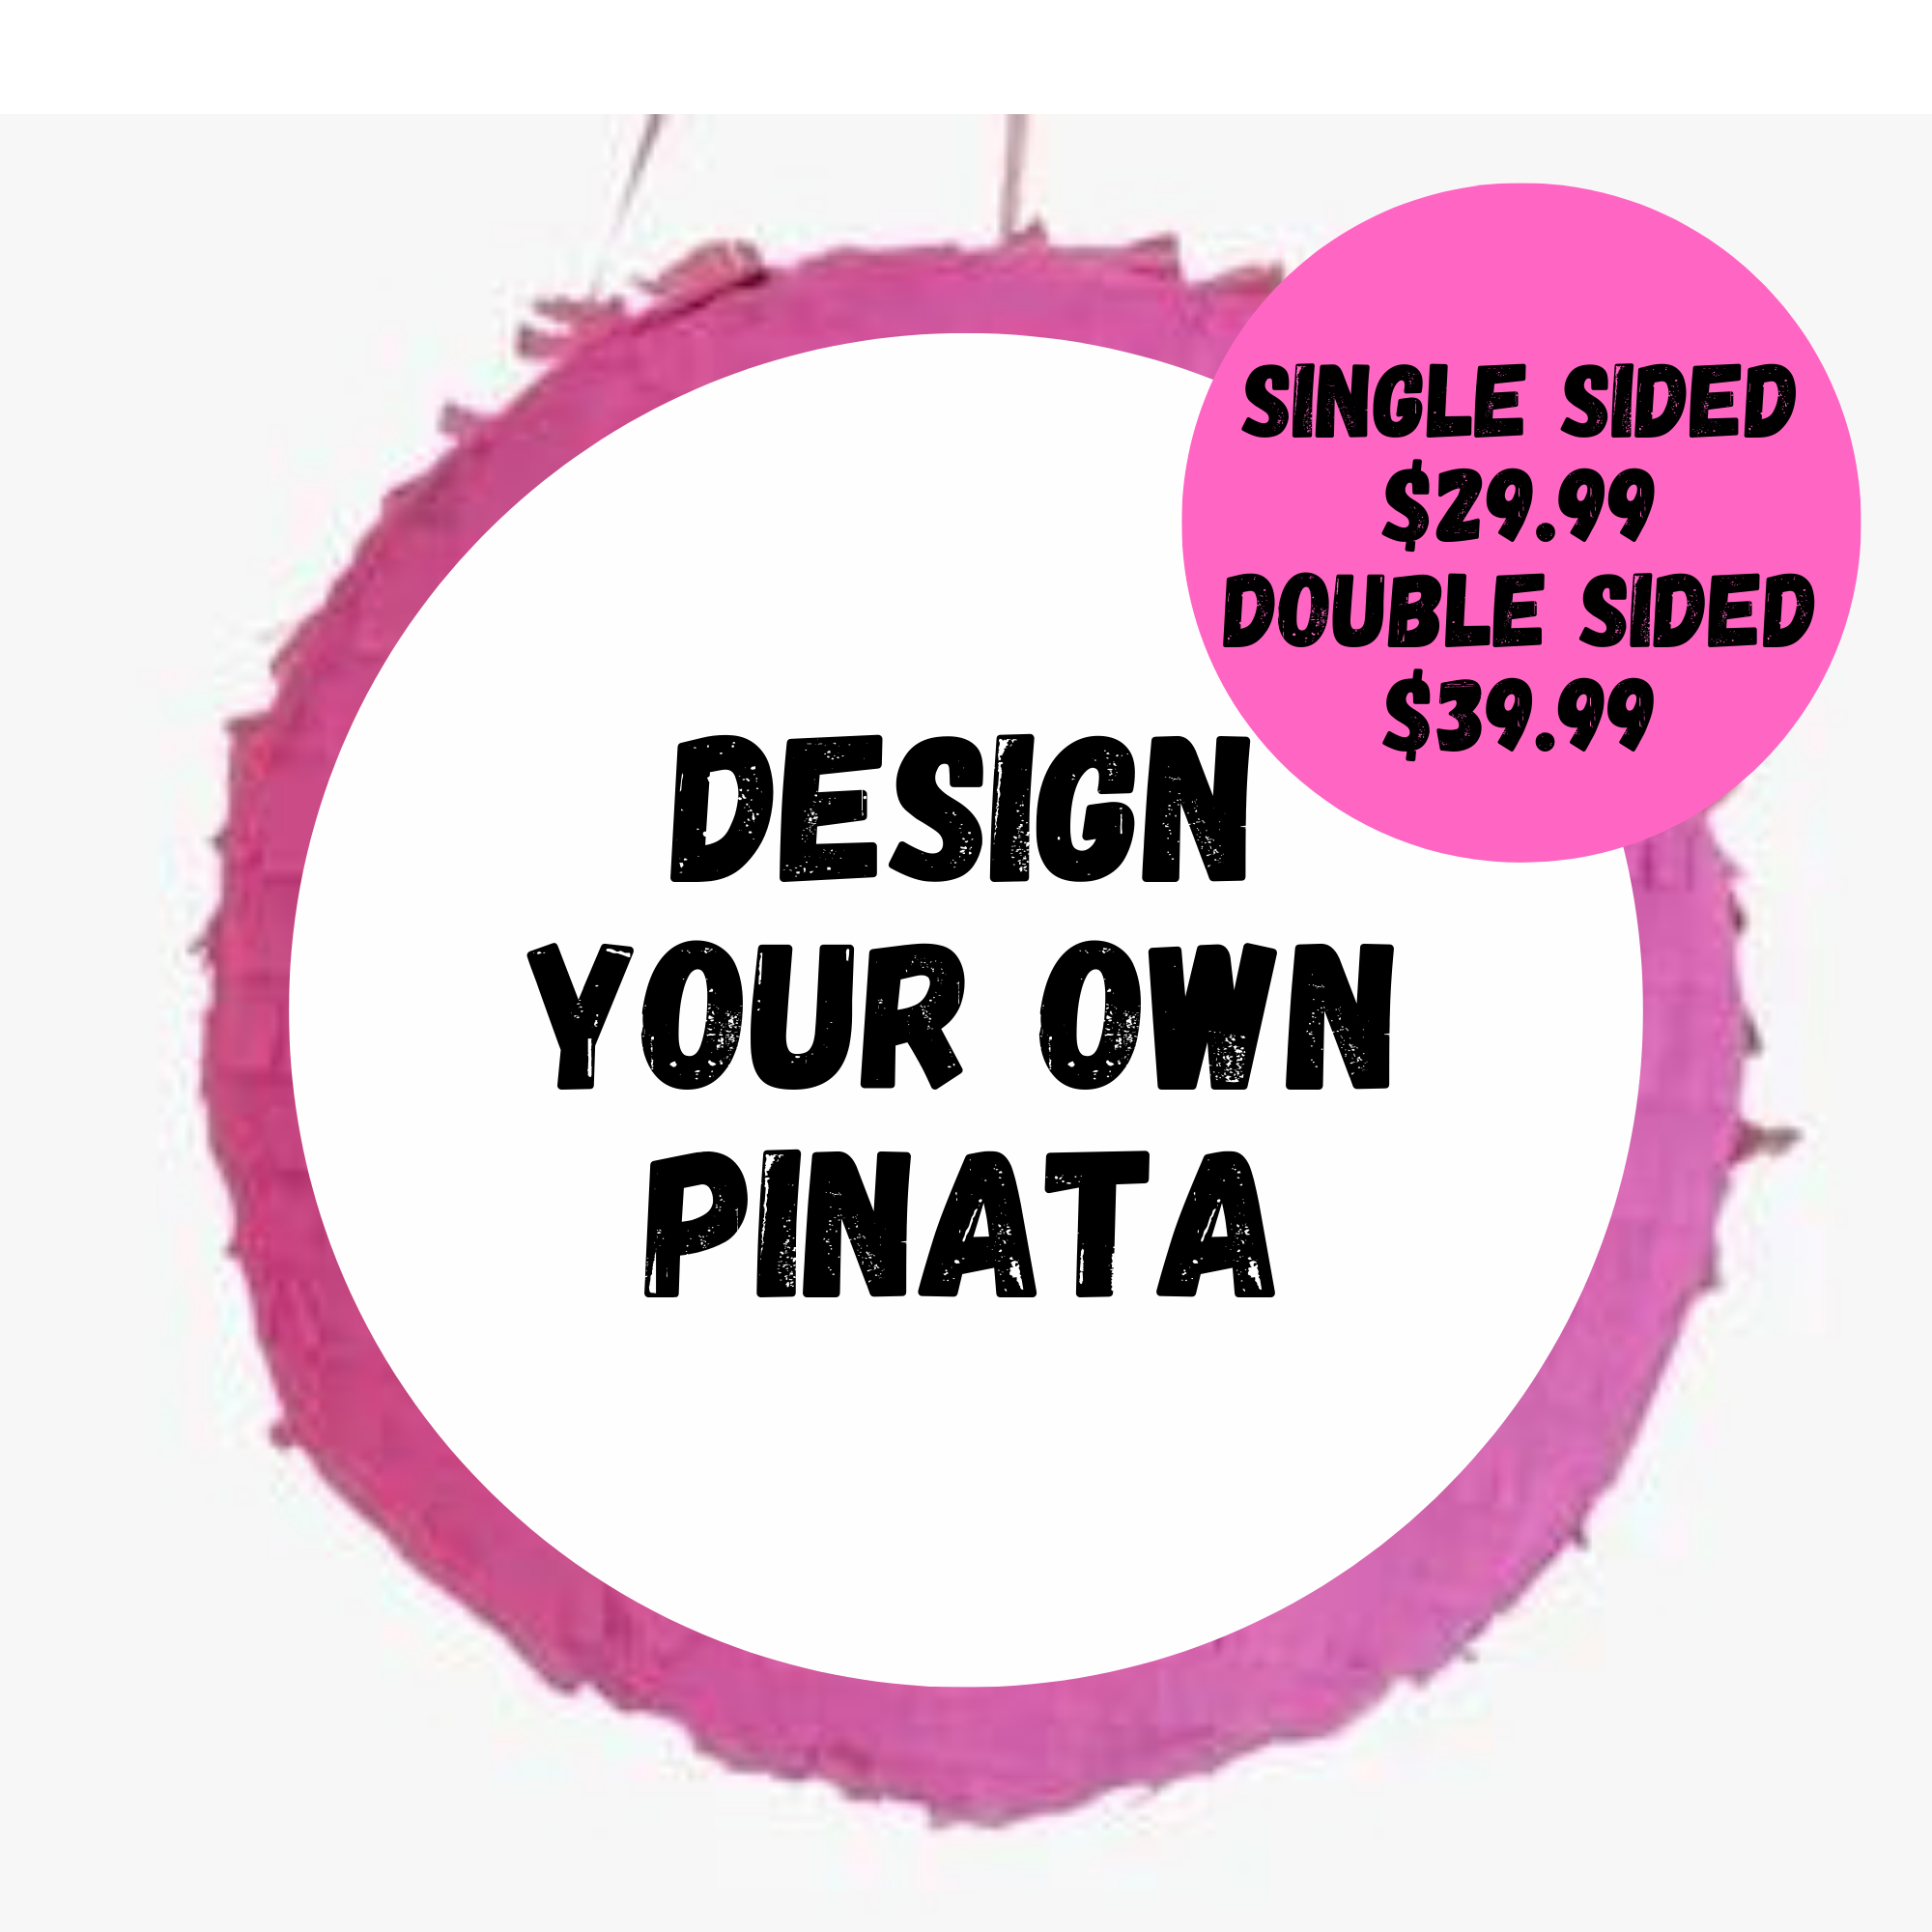 Custom Pinatas - Create Your Own Image - POPPartyballoons